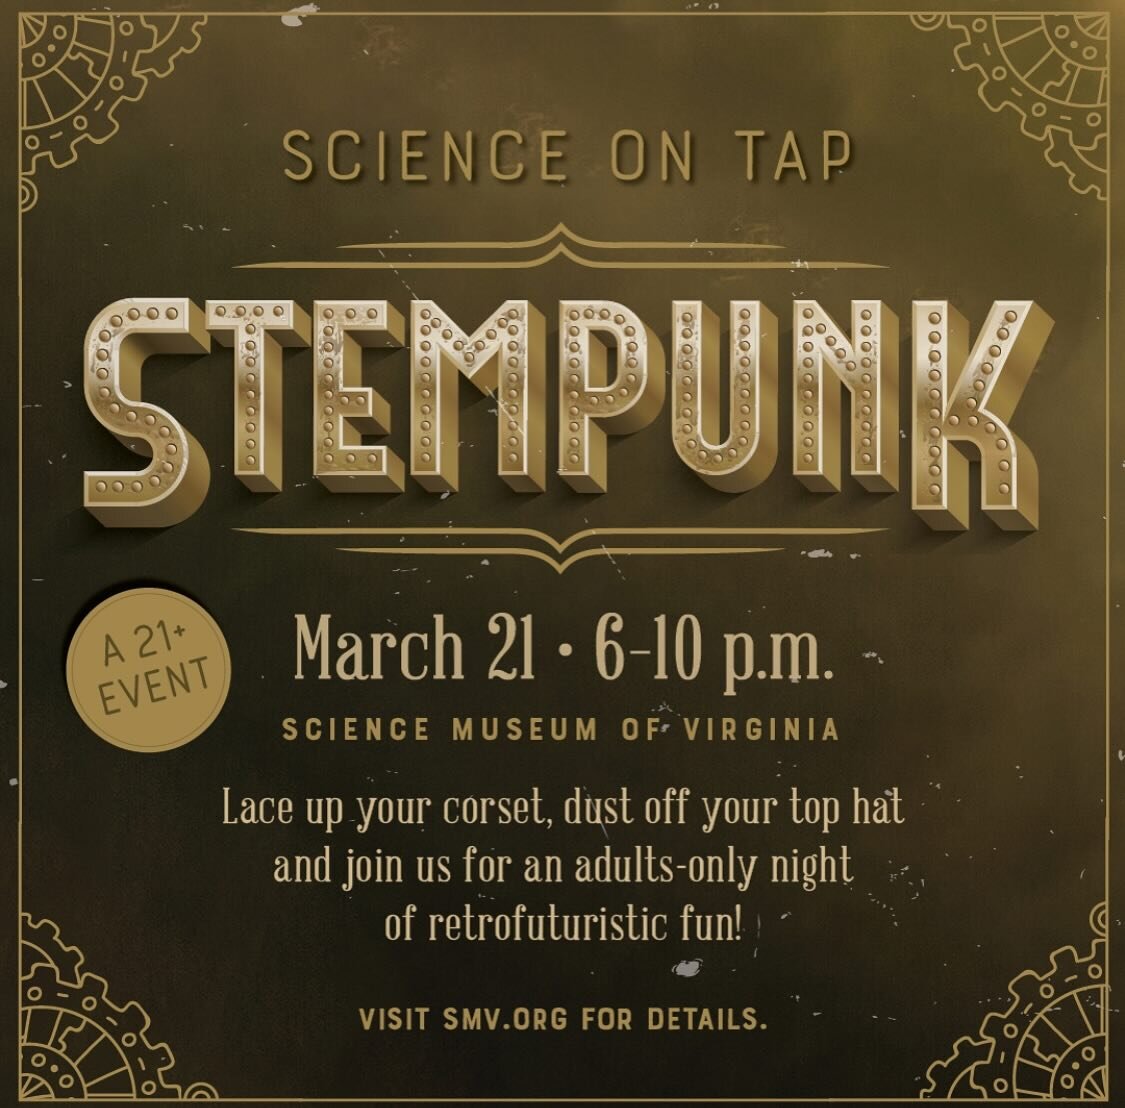 Charles, JM, and Josh will be providing roving music at this mind expanding event. 

Will they be wearing top hats and goggles while piloting steam powered banjo vehicles?  Only one way to find out!

#stem #stembanjo #stembandmusic #stemgrass